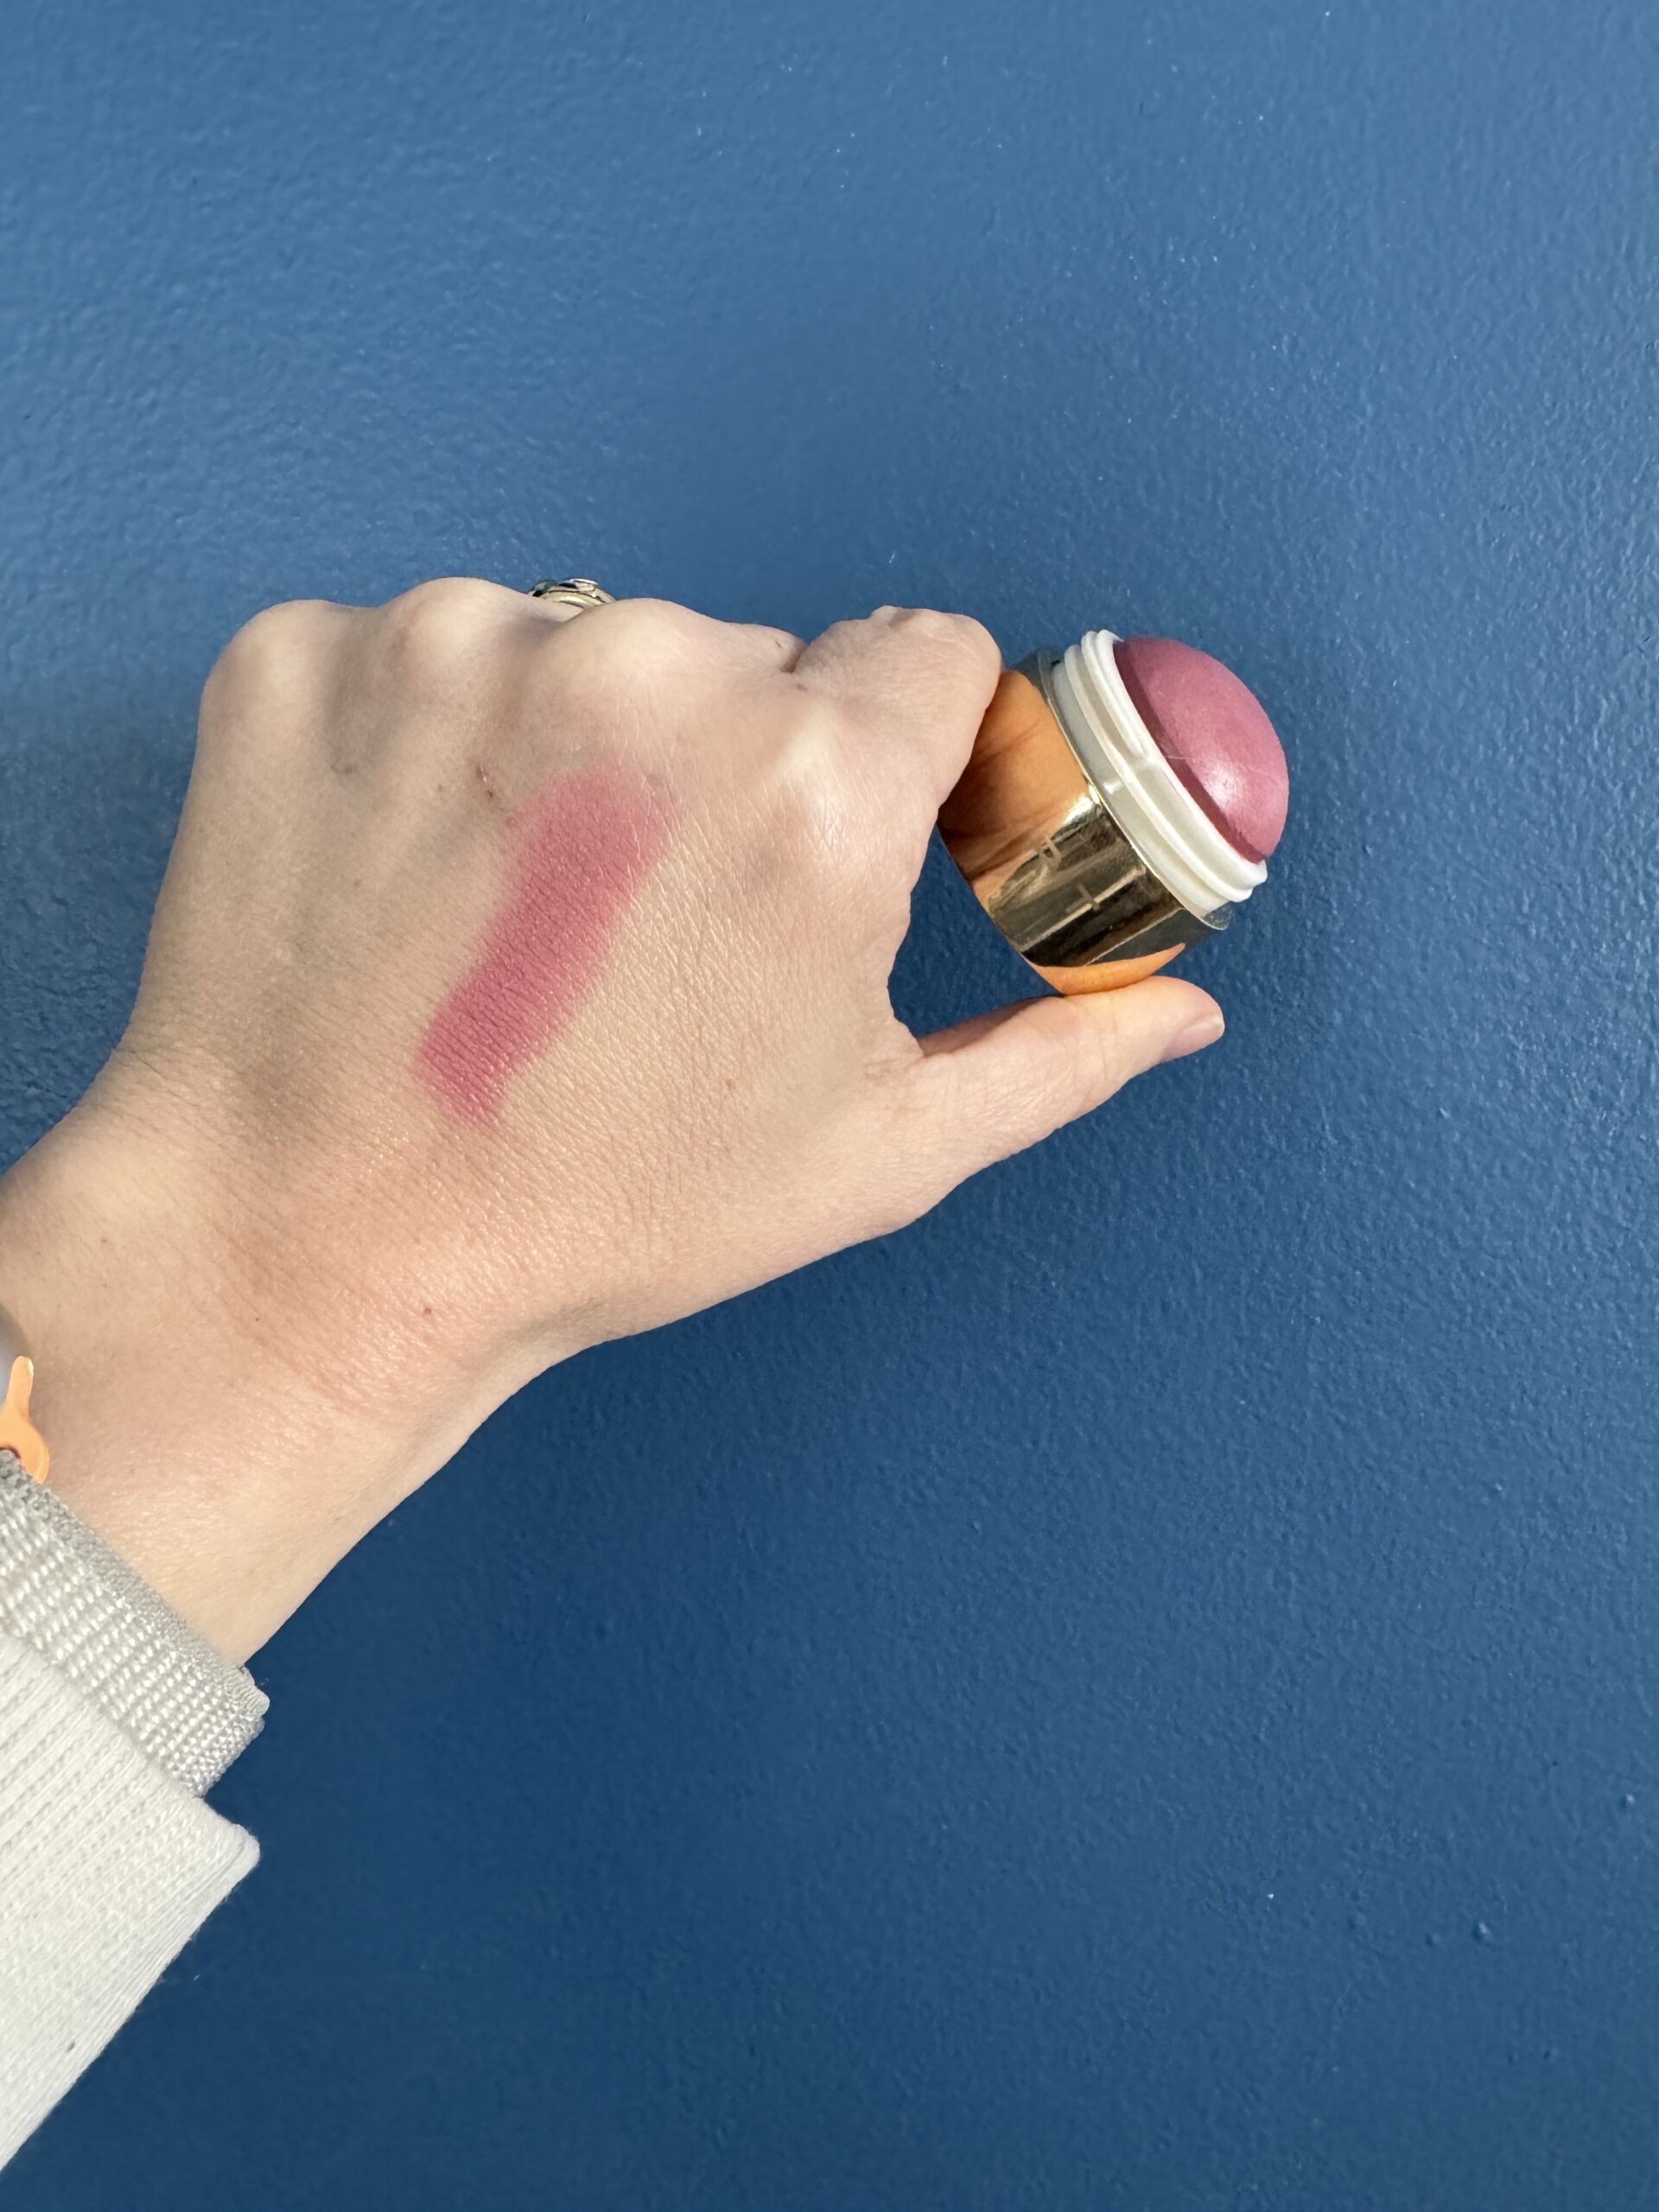 A hand holding a cosmetic product against a blue background with a swatch of pink makeup on the skin.